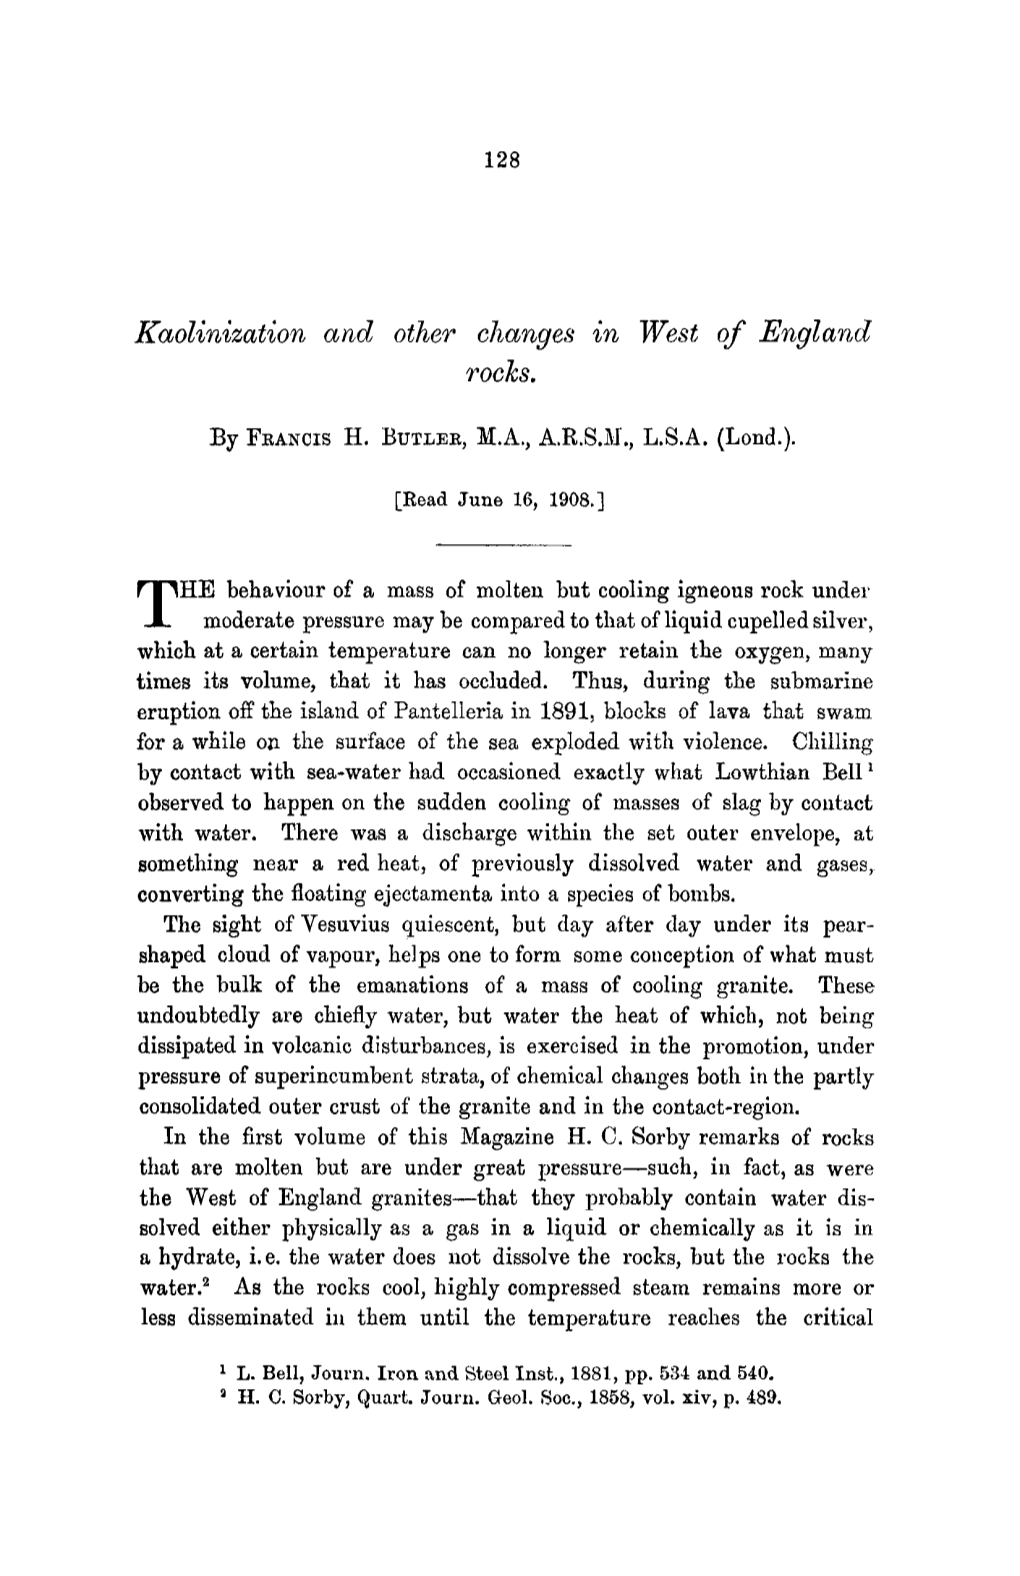 Kaolinization and Other Changes in West of England Rocks